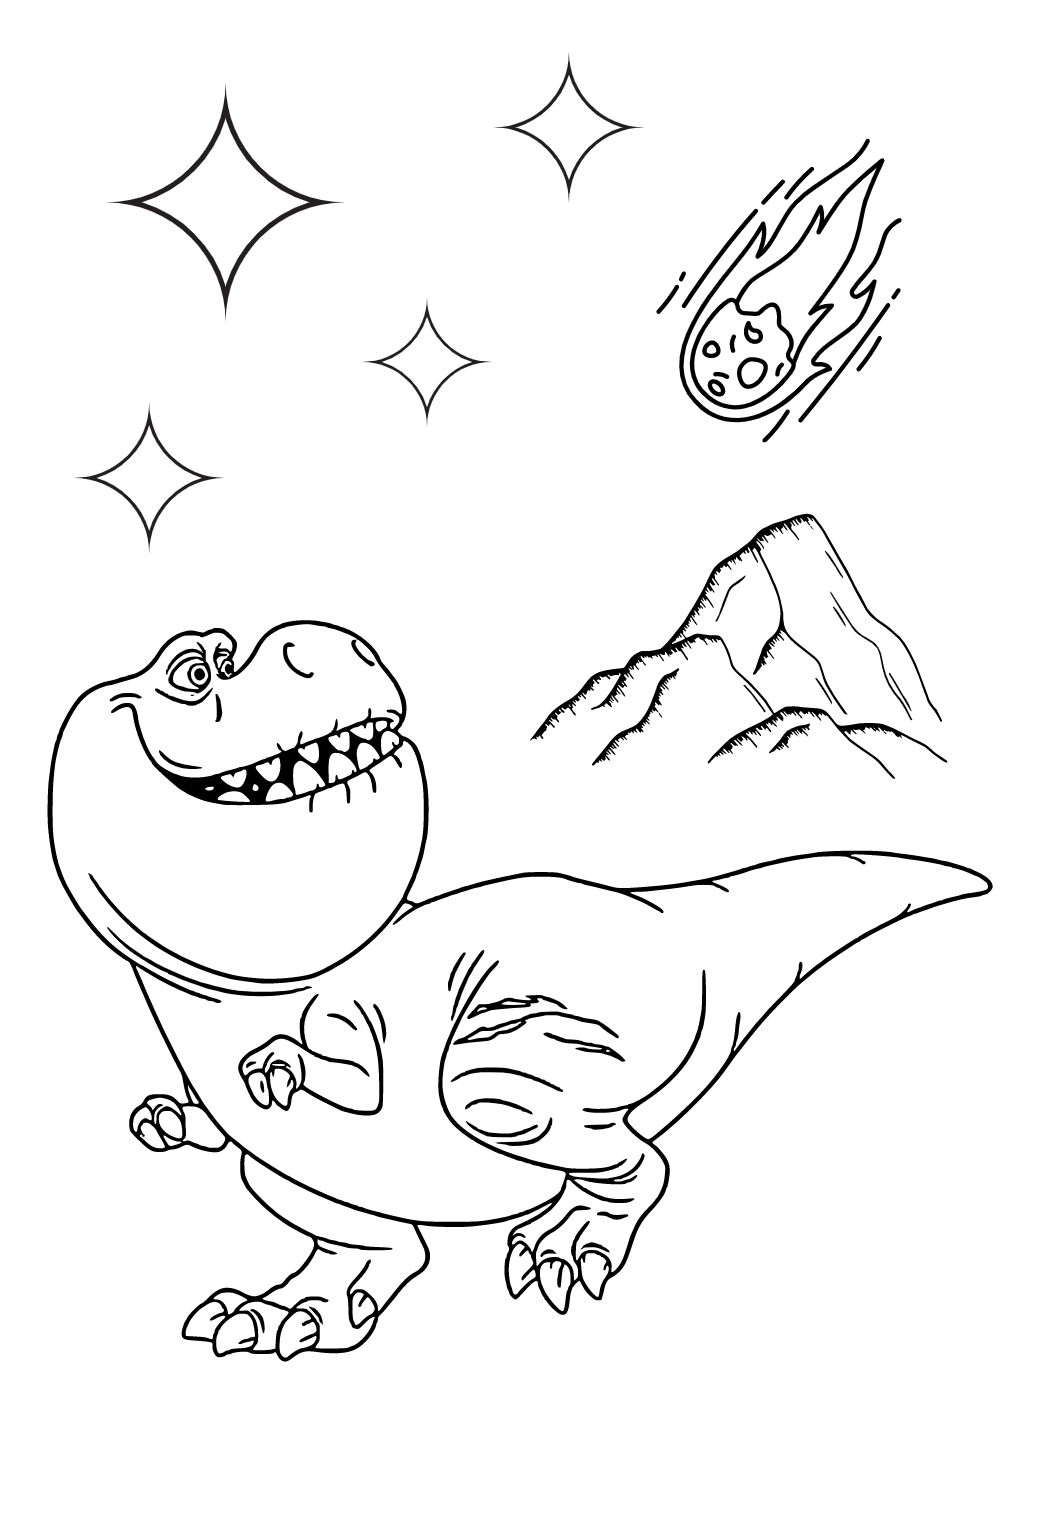 Free printable dinosaur et coloring page for adults and kids